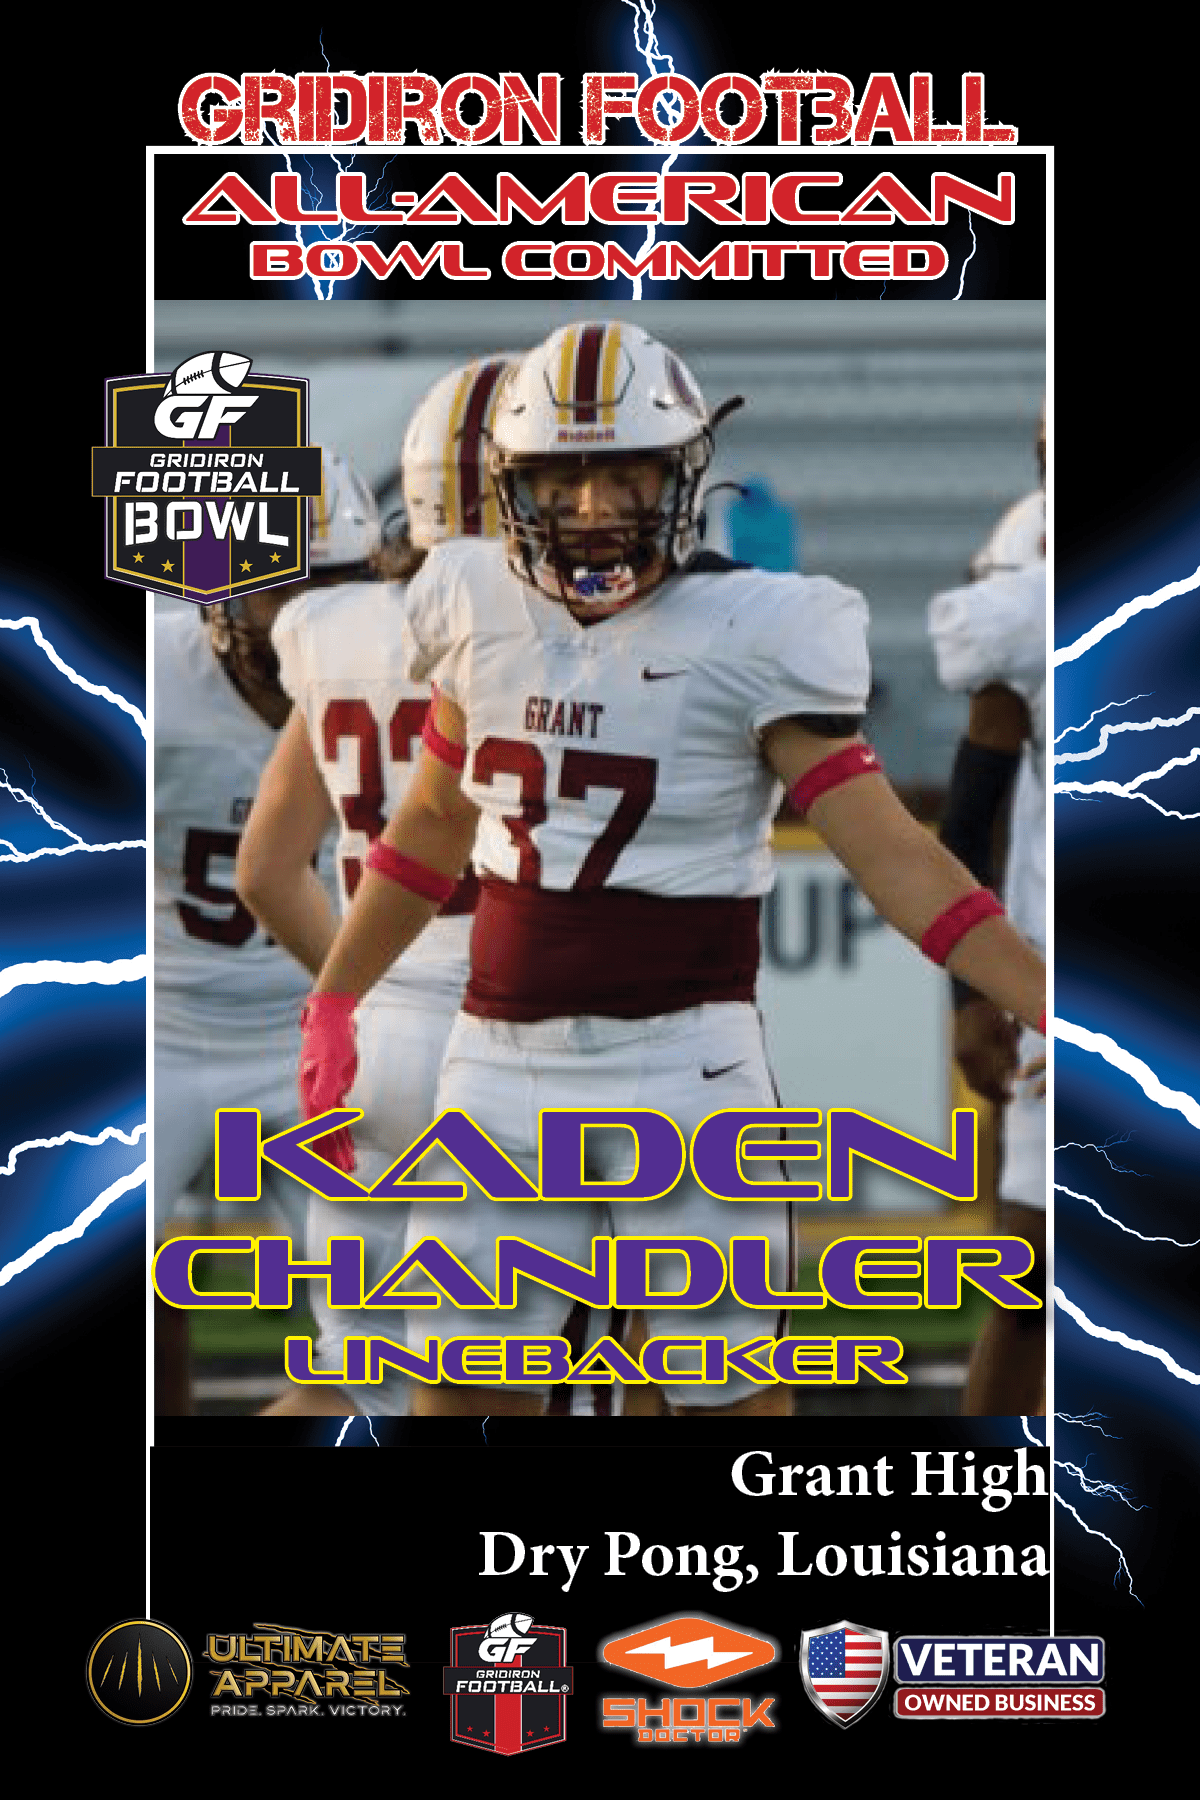 BREAKING NEWS: Grant High School (Dry Prong, LA) LB Kaden Chandler Commits To The Gridiron Football All-American Bowl Game